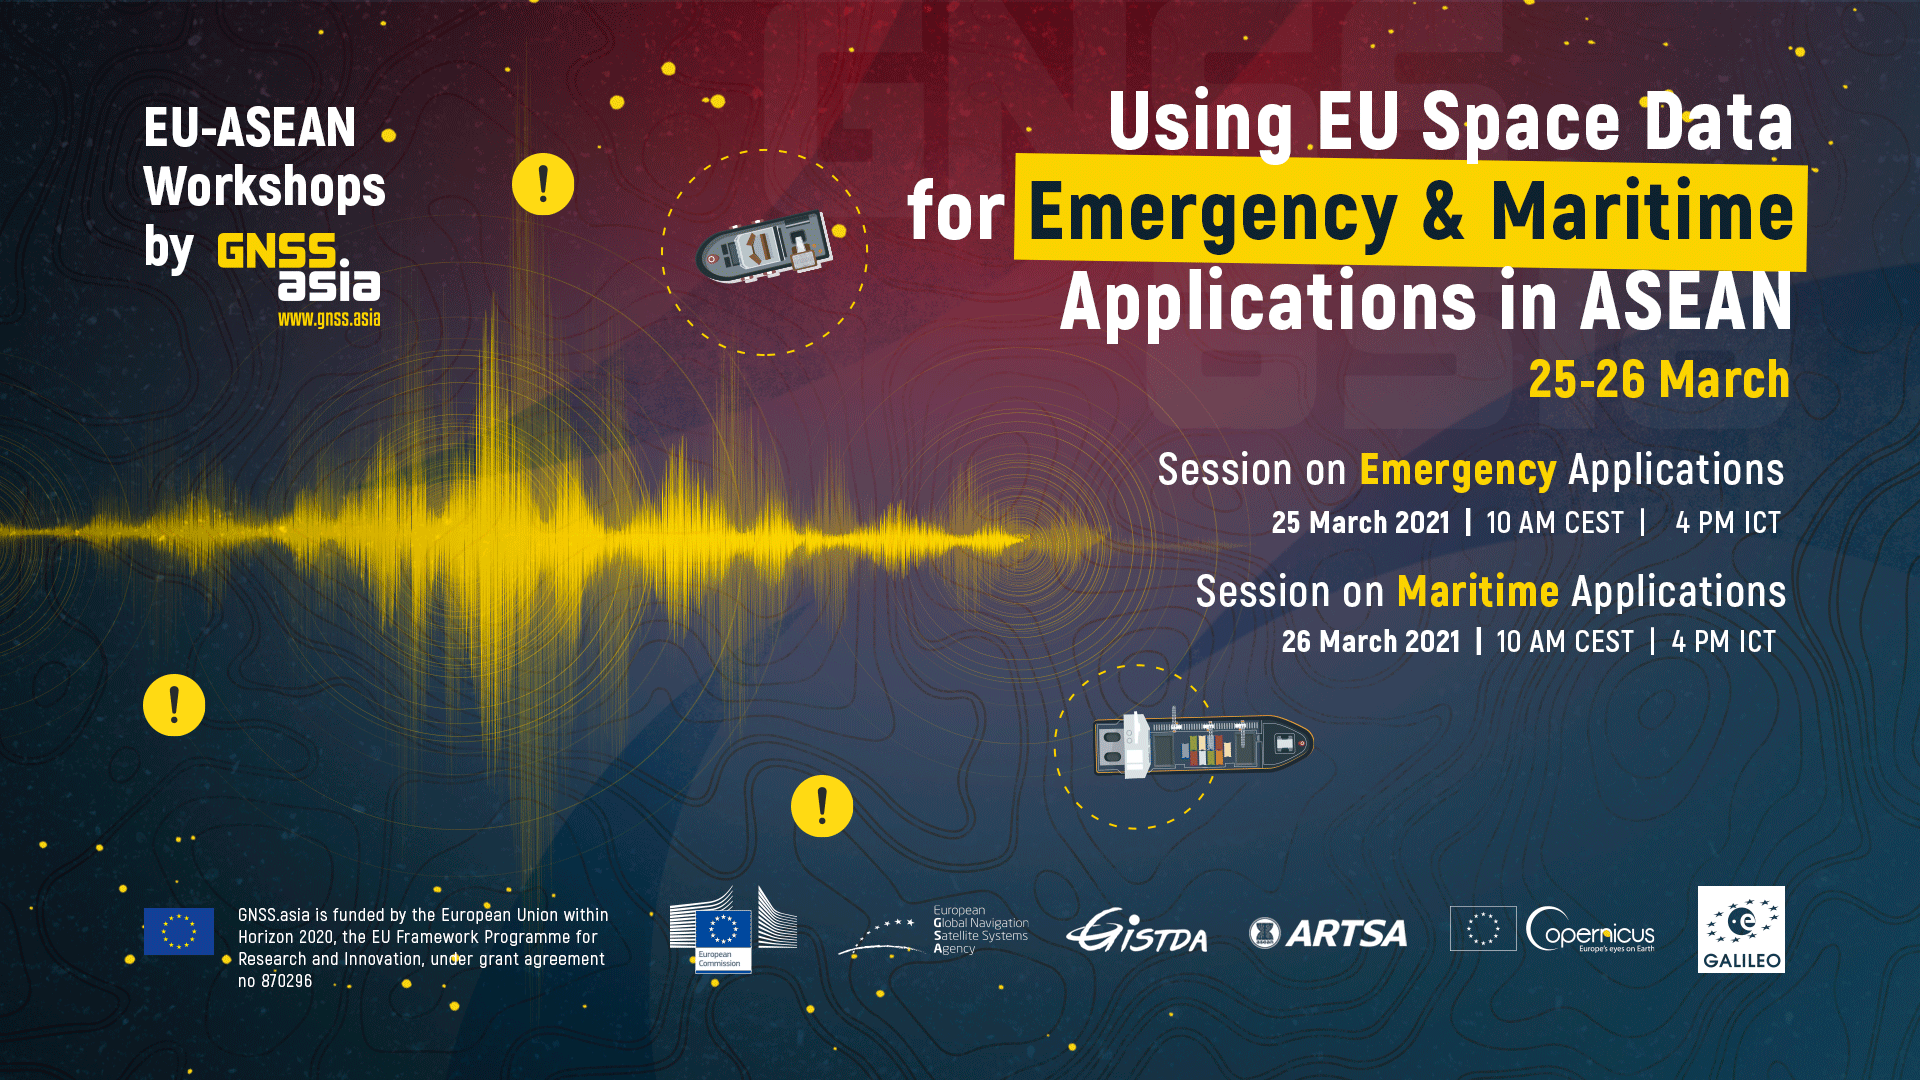 EU-ASEAN Workshop by GNSS.asia on using EU Space Data for Emergency & Maritime Applications in ASEAN